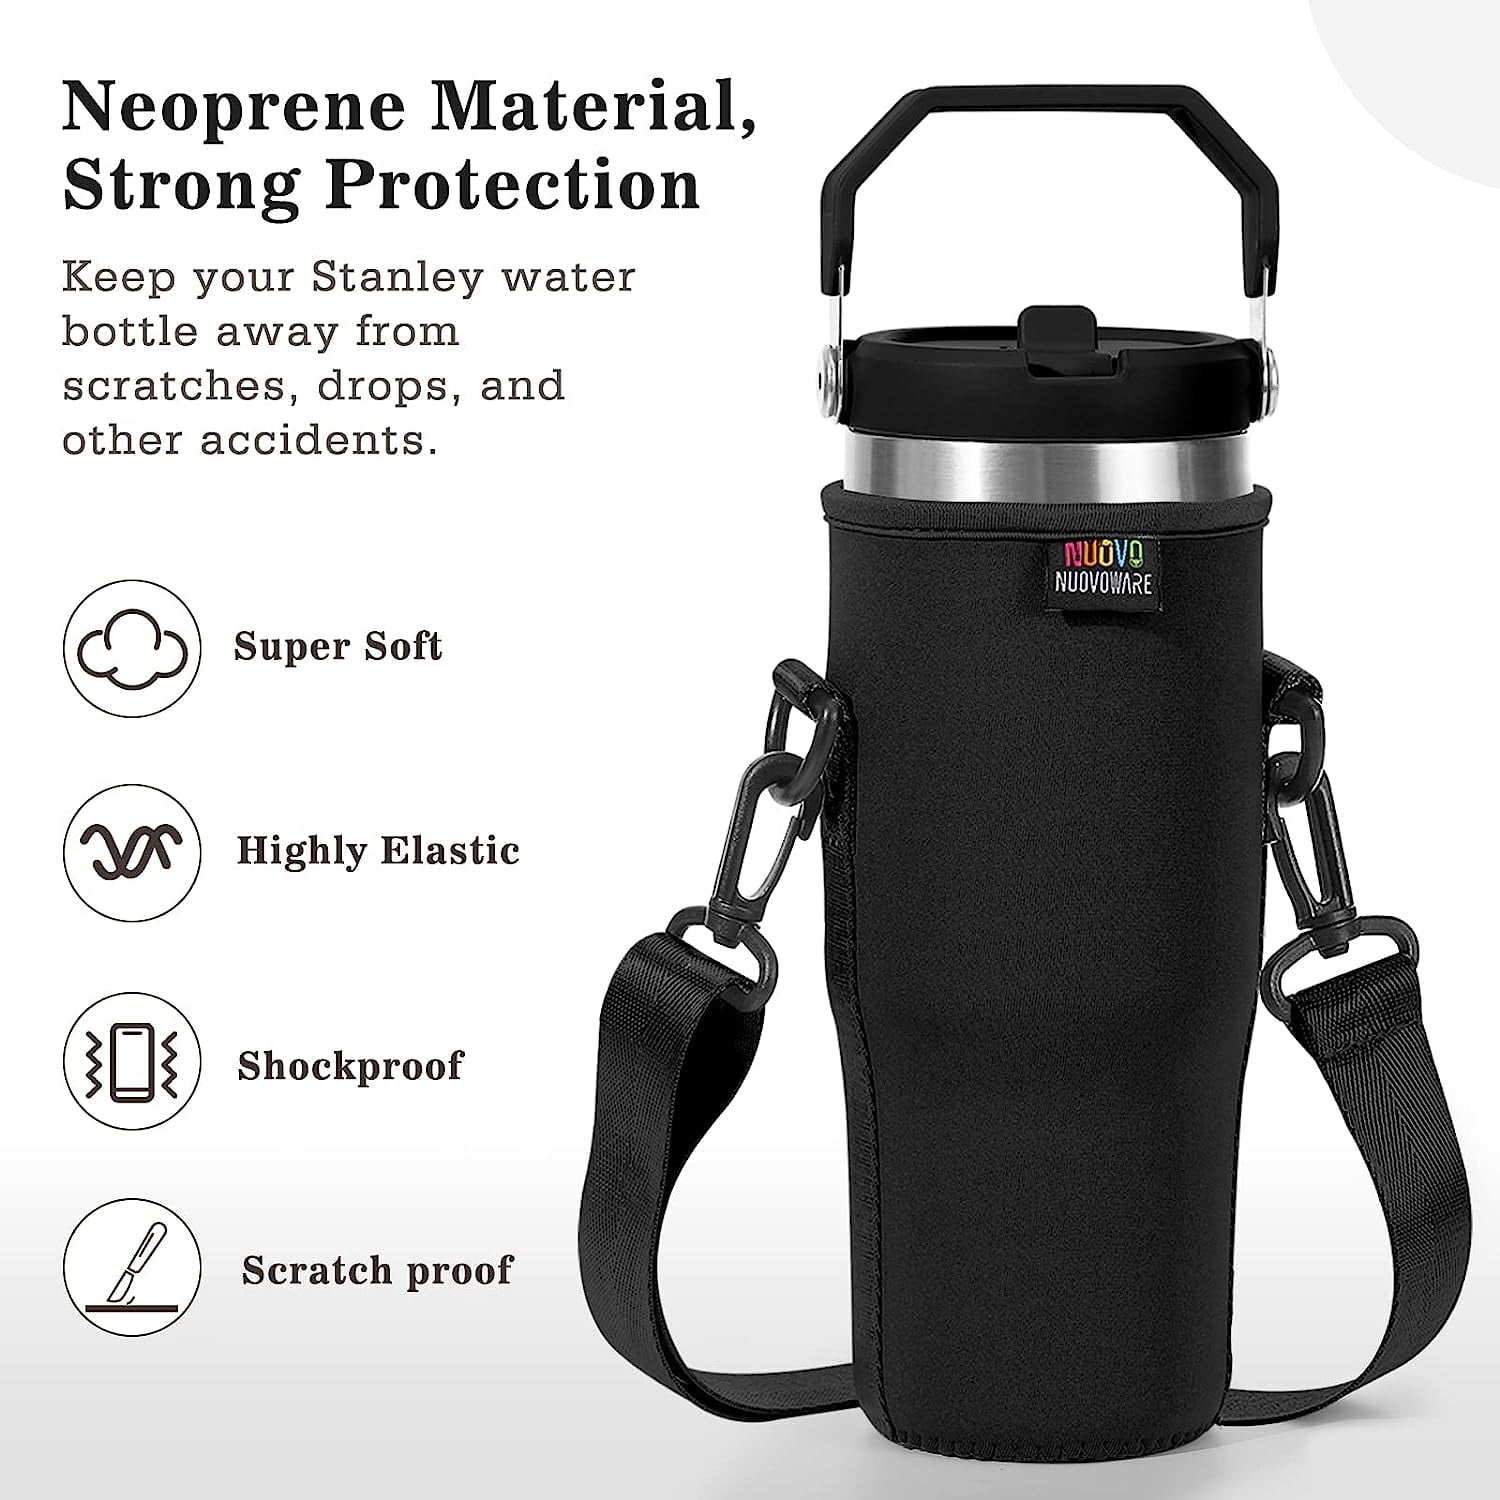 for Stanley Iceflow Flip Straw Tumbler 30 oz, Water Bottle Cup Holder Cover  Carrier Sling Bag with Strap, Pouch Pocket for Phone / Accessories, add